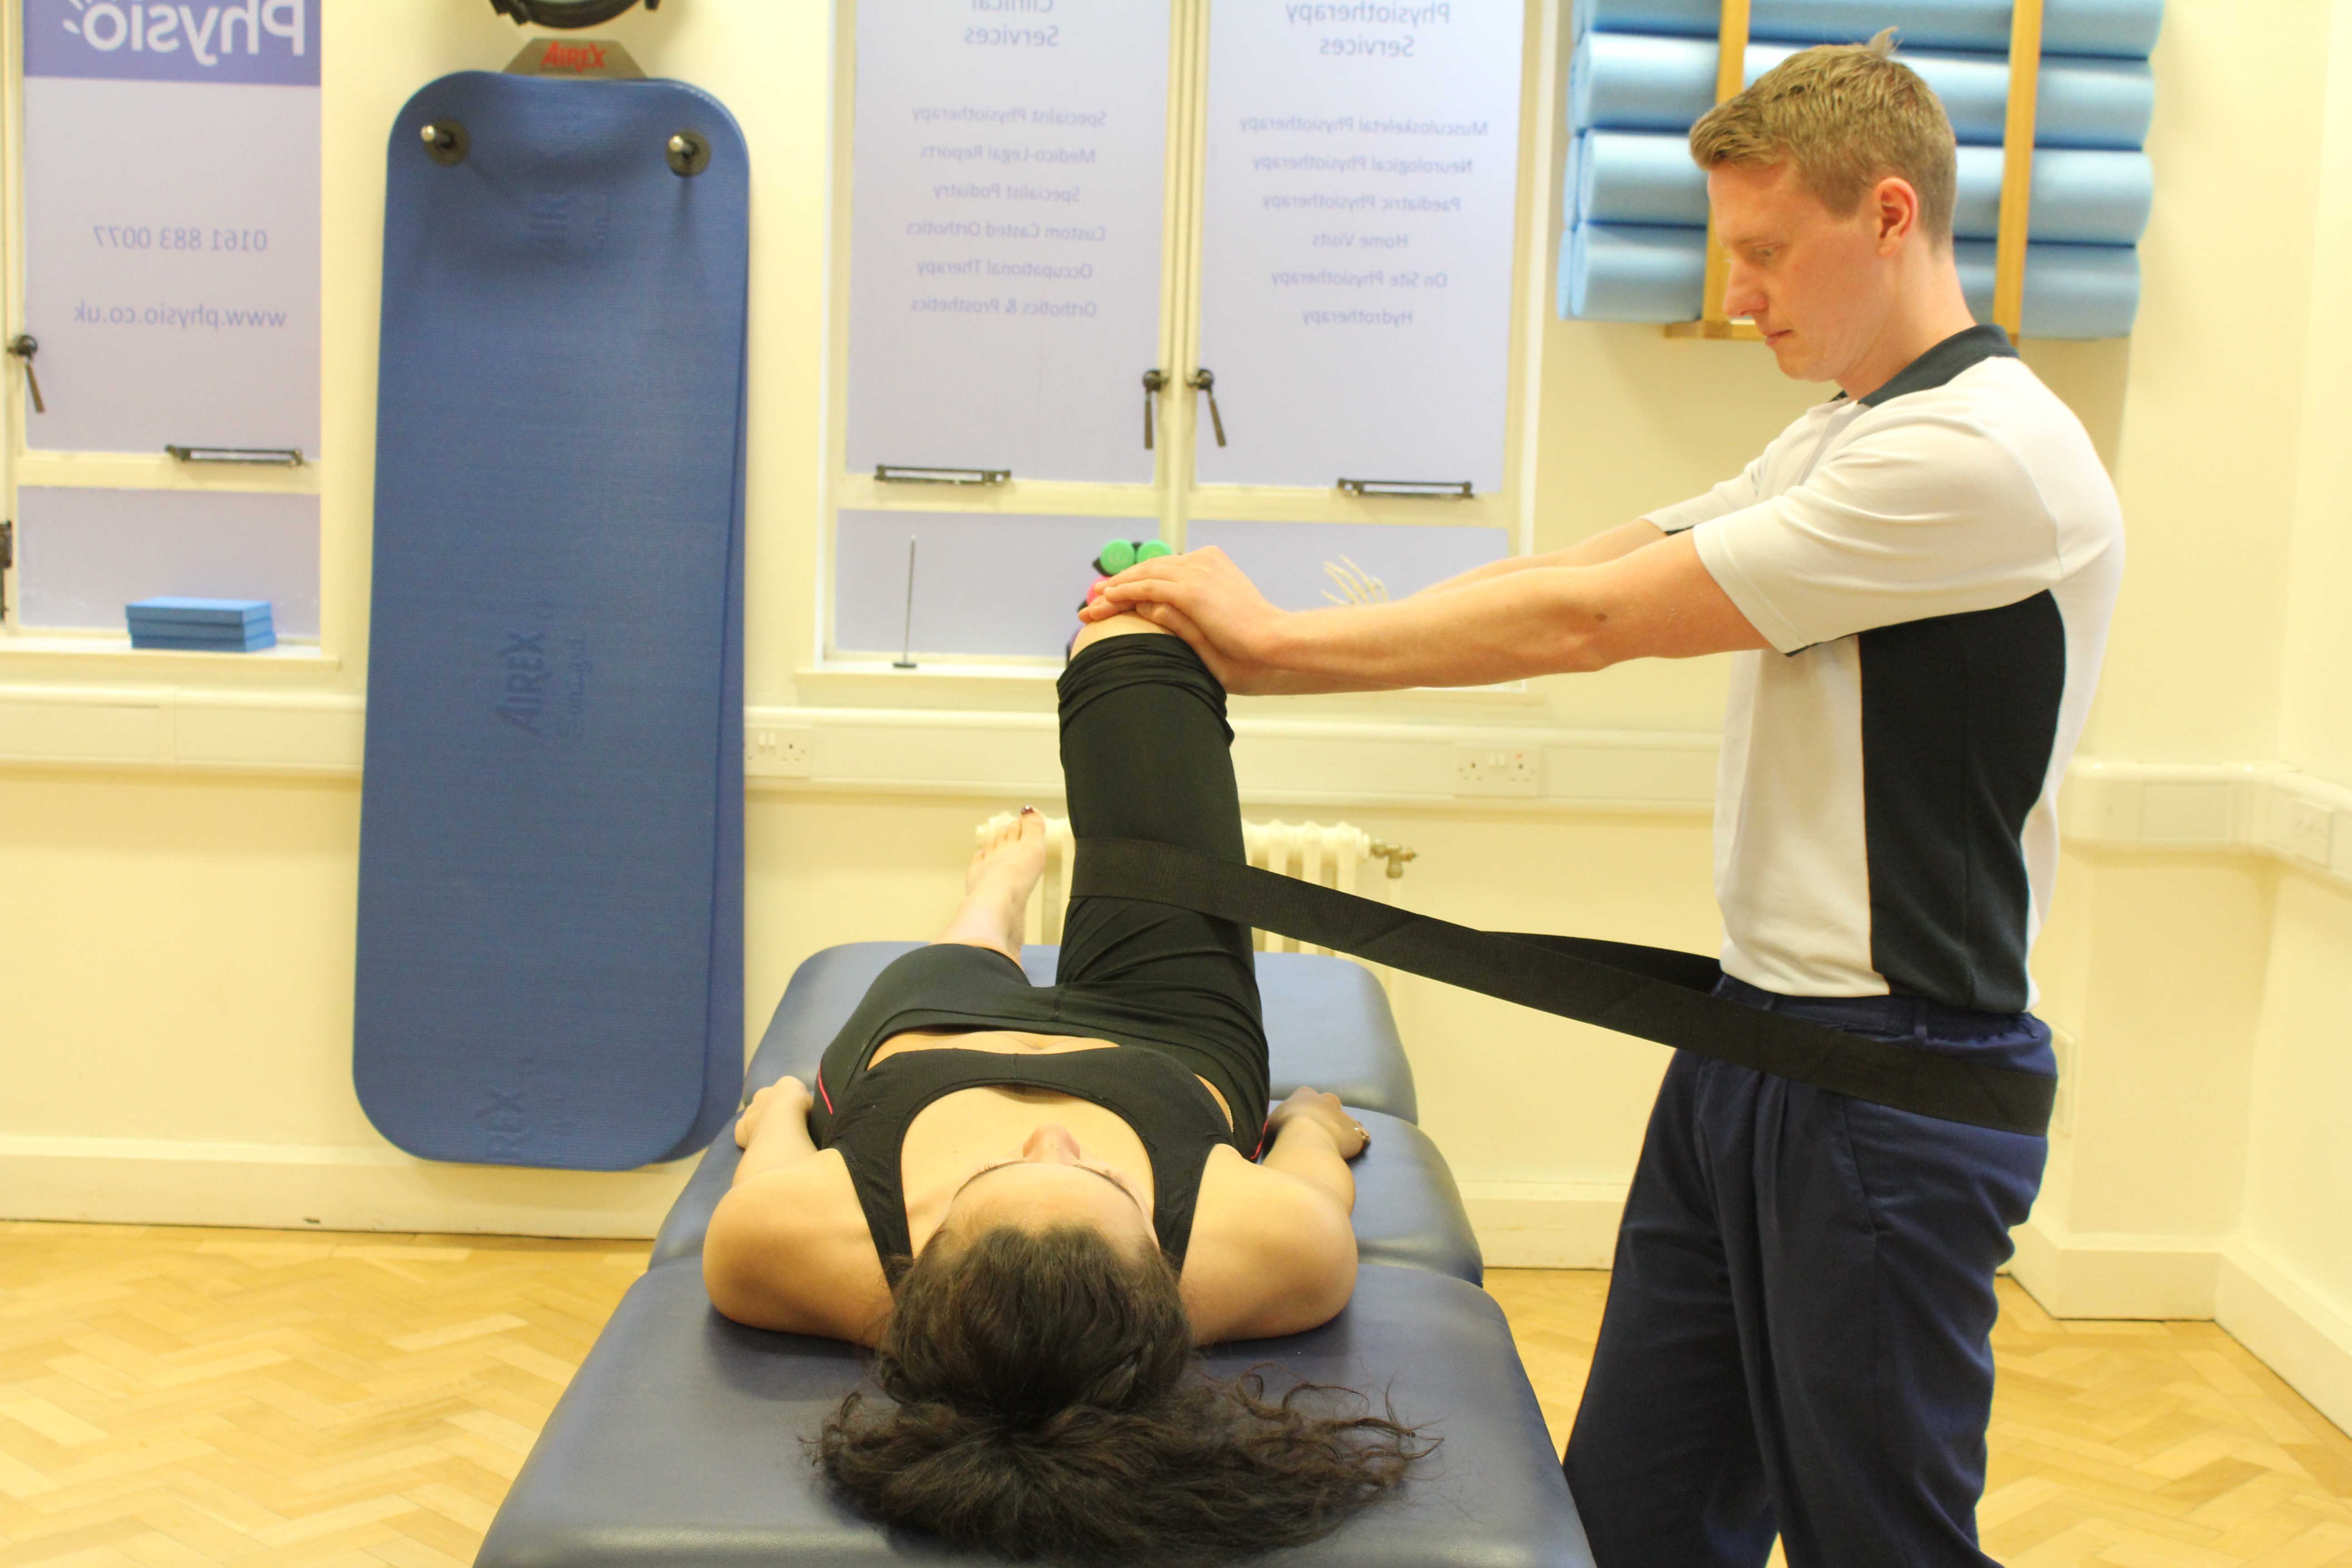 Mobilisations of the hip joint with a strap by an experienced physiotherapist